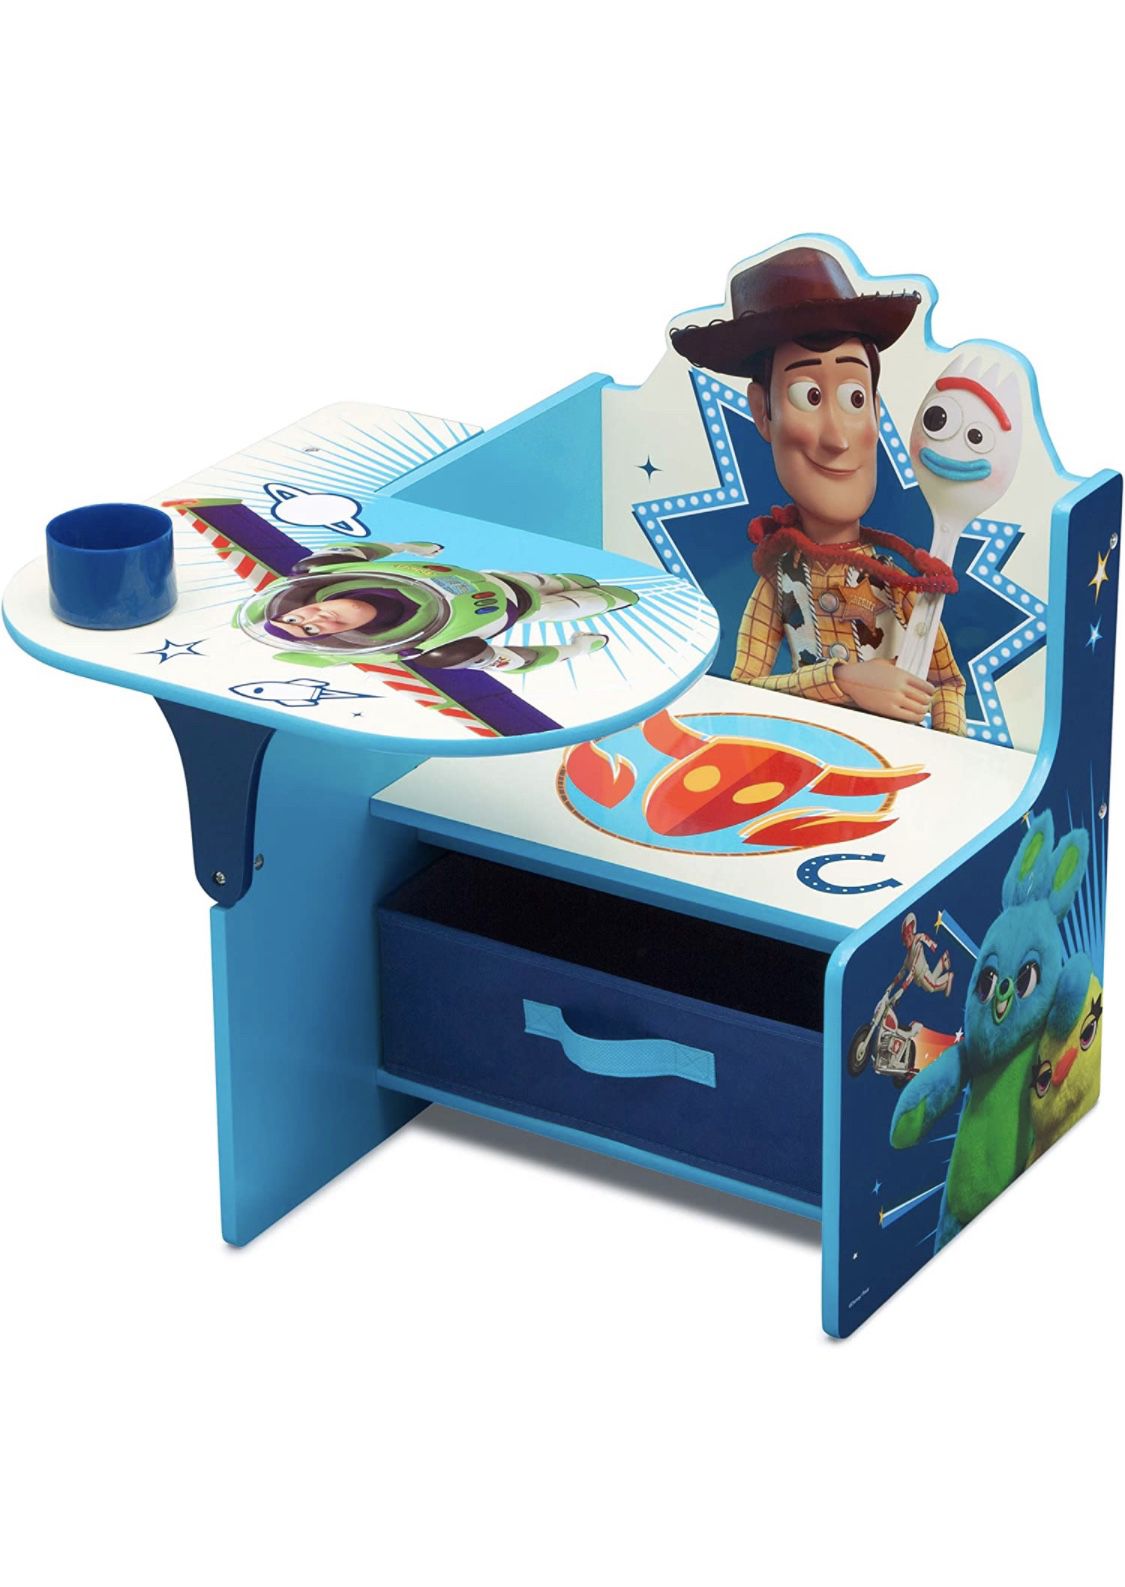 Kids Disney Toy Story Chair Desk With Storage Bin Coloring Art Play Furniture